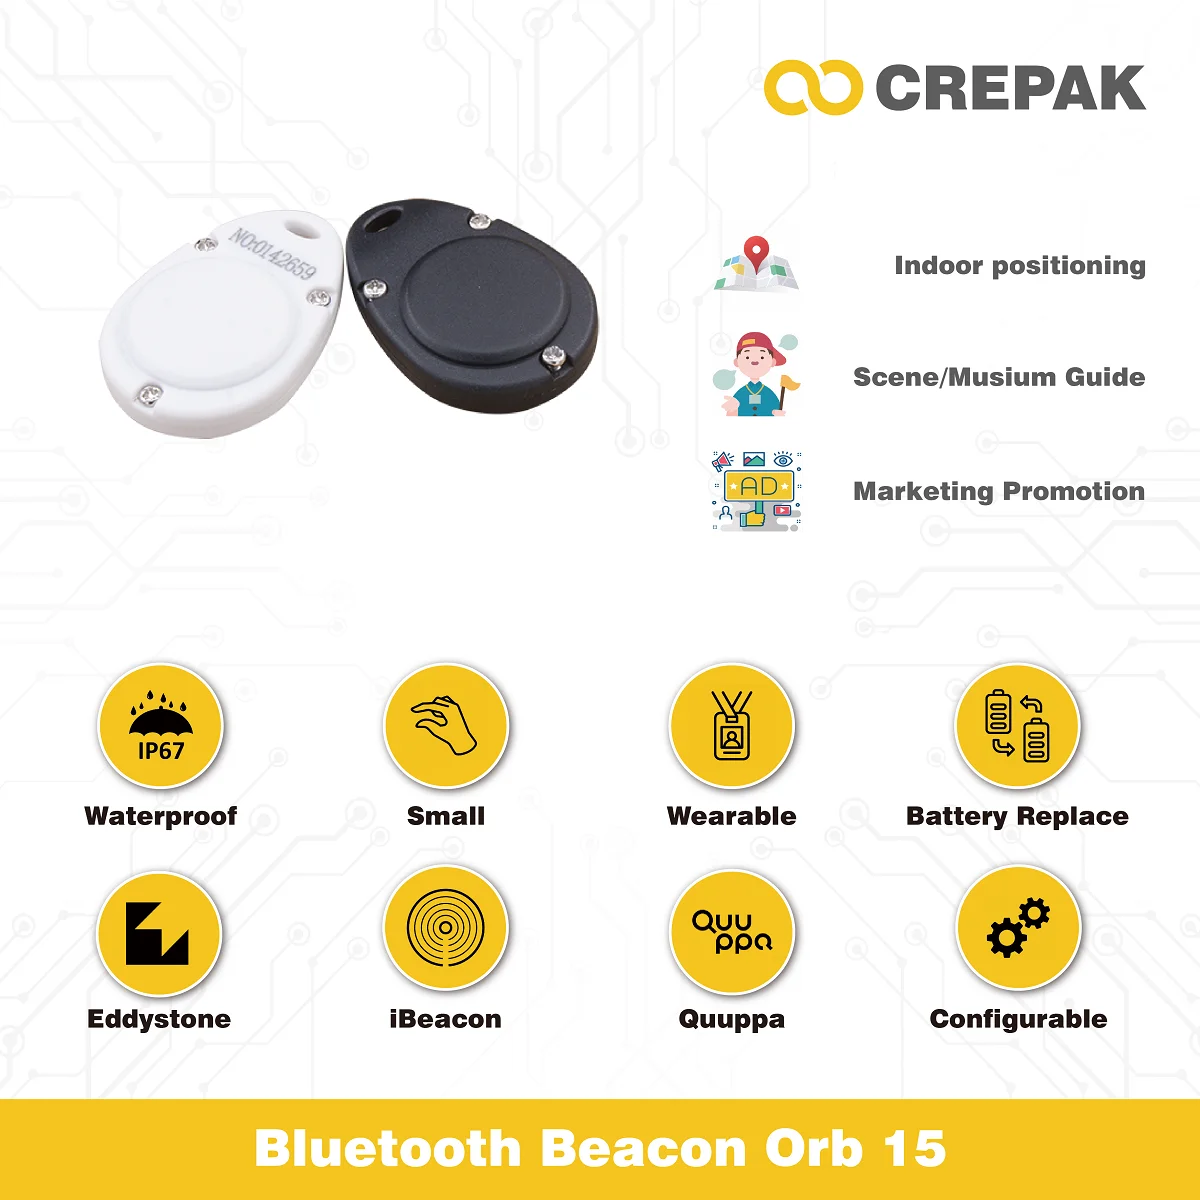 

2 Years Small Waterproof Battery Replaceable Bluetooth AOA Beacon/NRF 52810/Ibeacon/Eddystone/Active RFID/BLE 5.0 Tag Orb 15